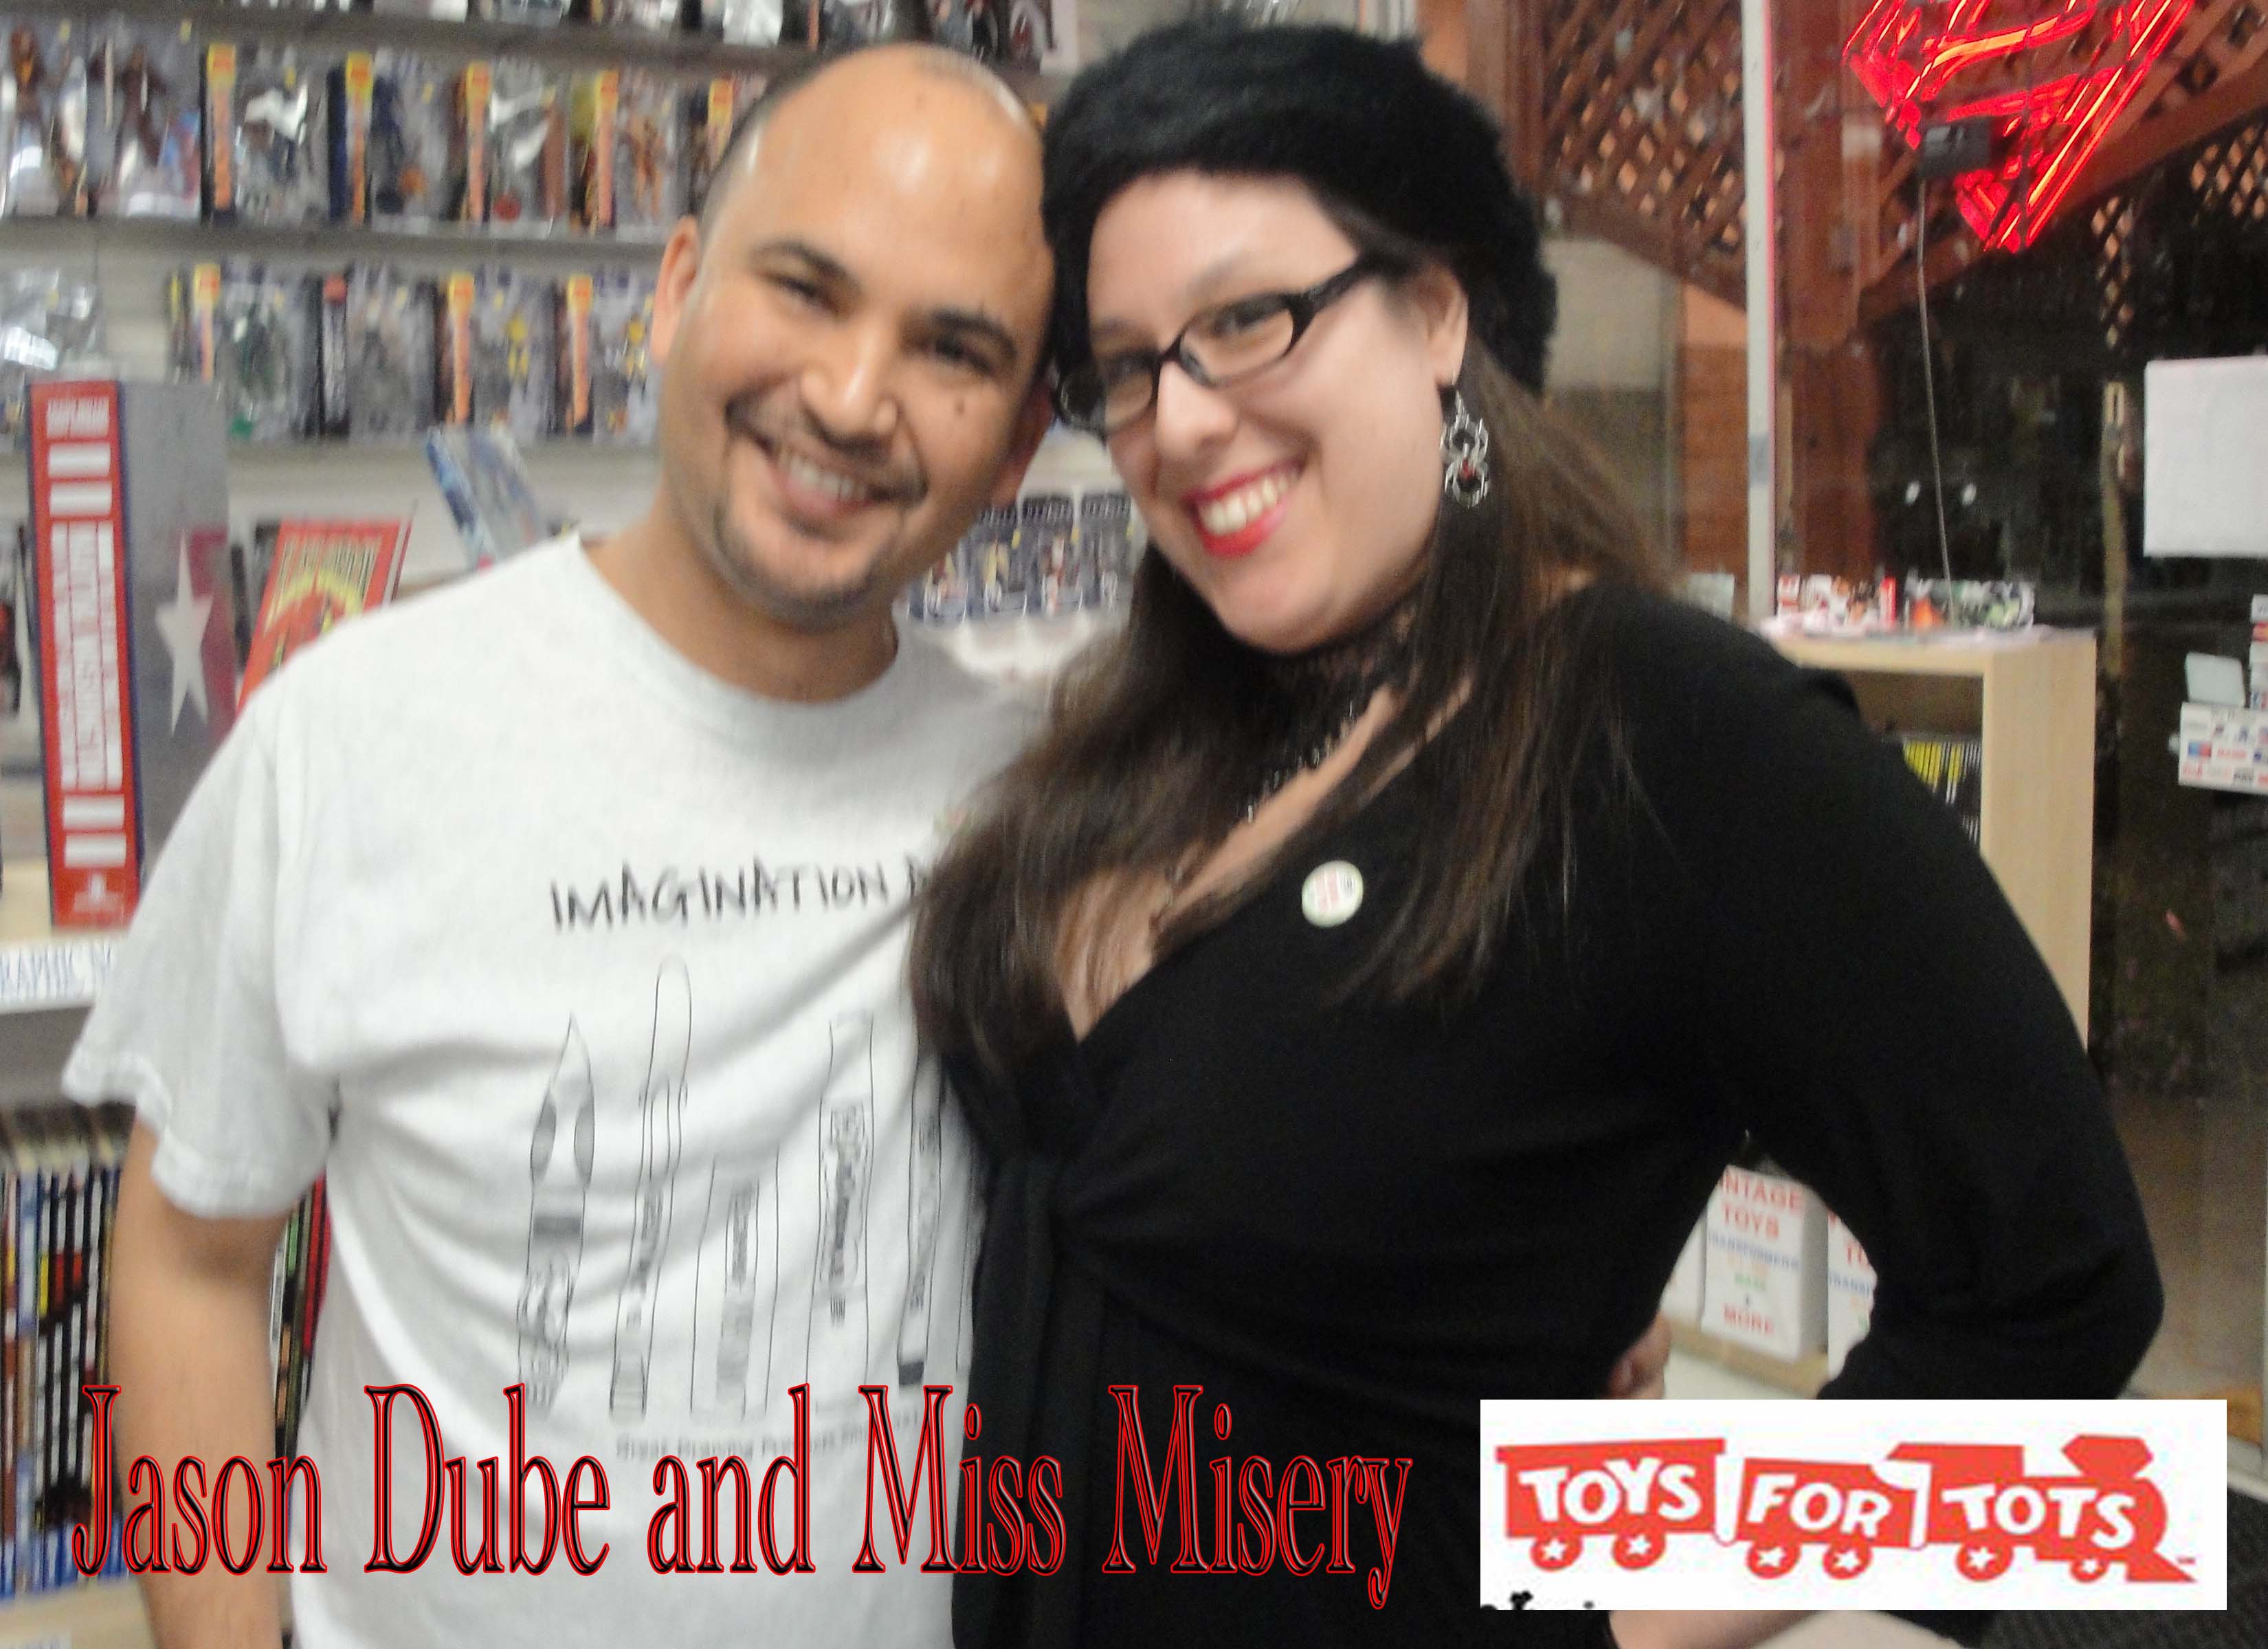 Jason Dube and I Host Toys For Tots Live Charity Event